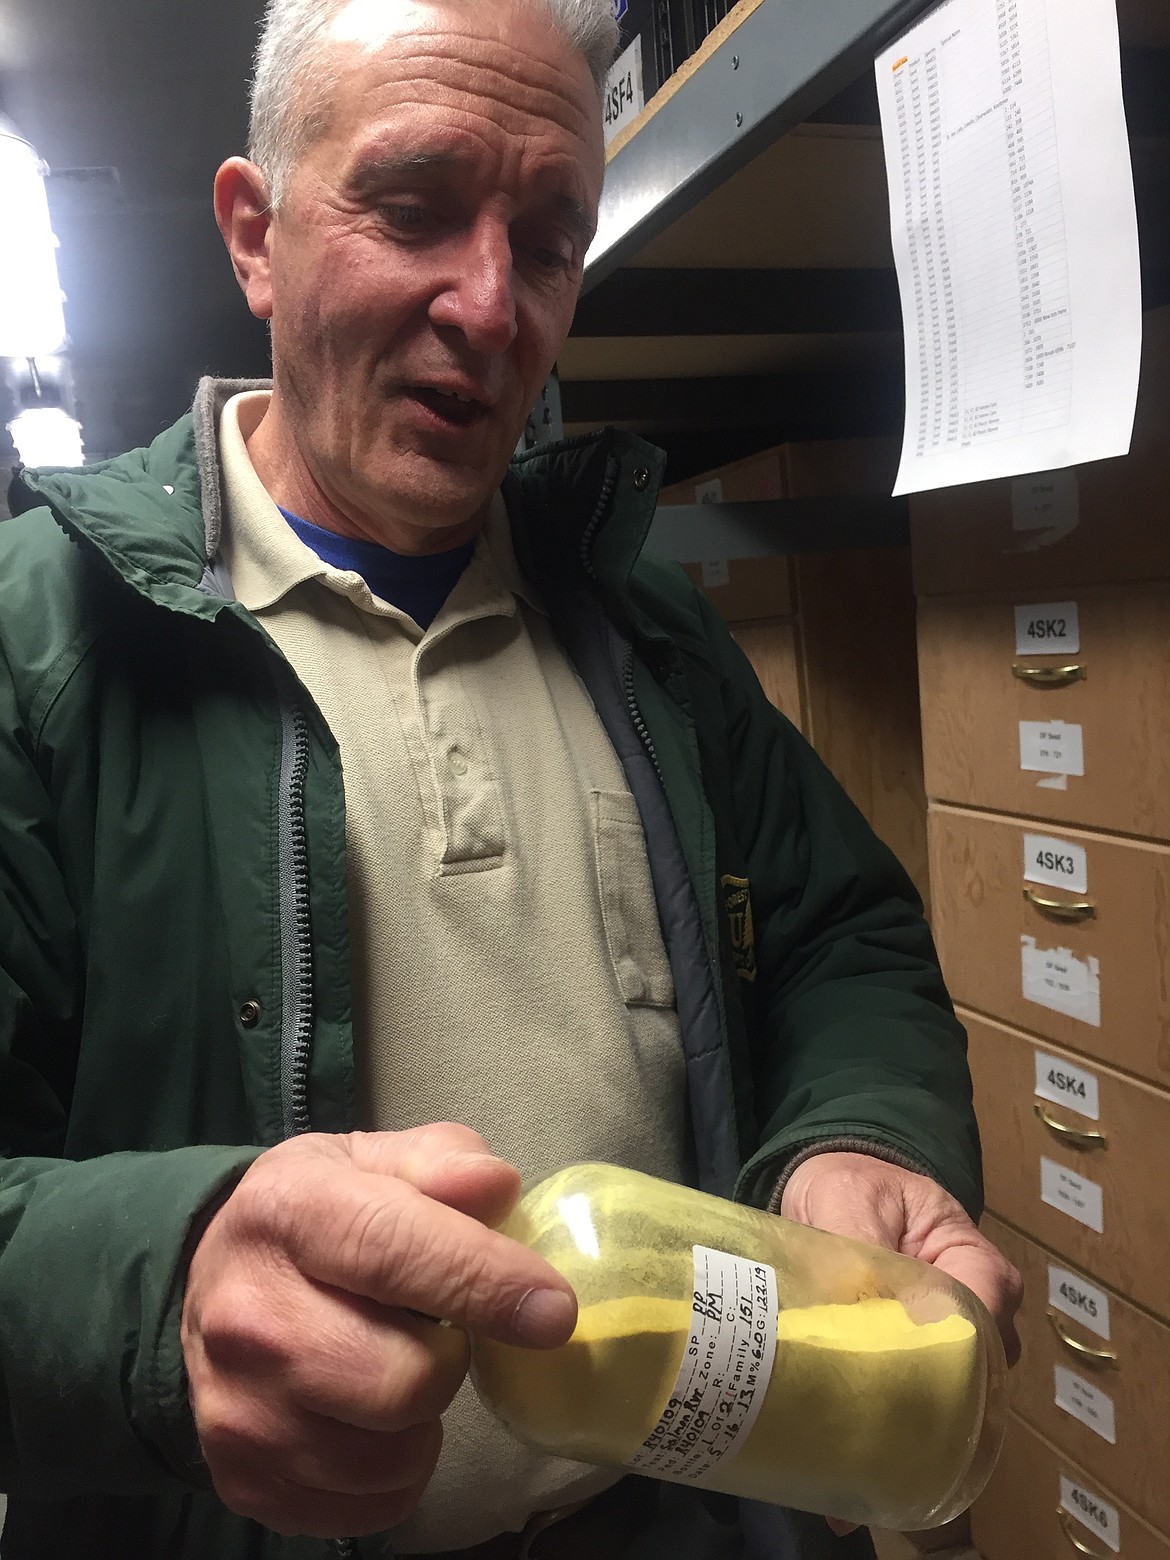 Aram Eramian turns a jar of pine pollen in the freezer at the Idaho Panhandle National Forests nursery where he is superintendent. The pollen is used to cross-fertilize disease resistant conifer seedlings. (JENNIFER PASSARO/Press)